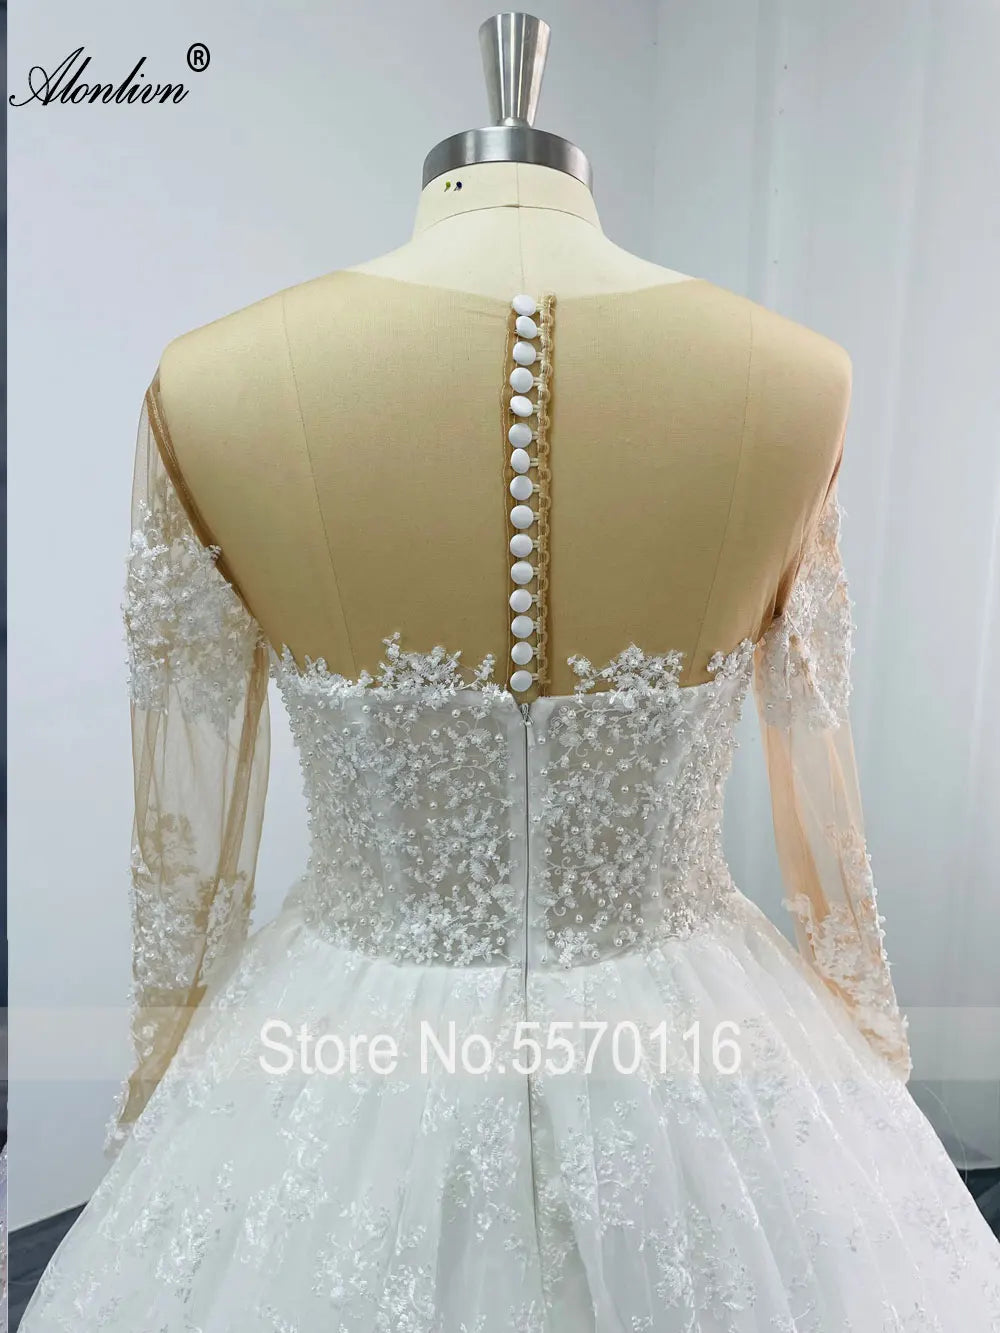 Elegant Silky Lace Of V-Neck Full Sleeve A Line Wedding Dress Beading Pearls Brown Skin Bridal Gowns